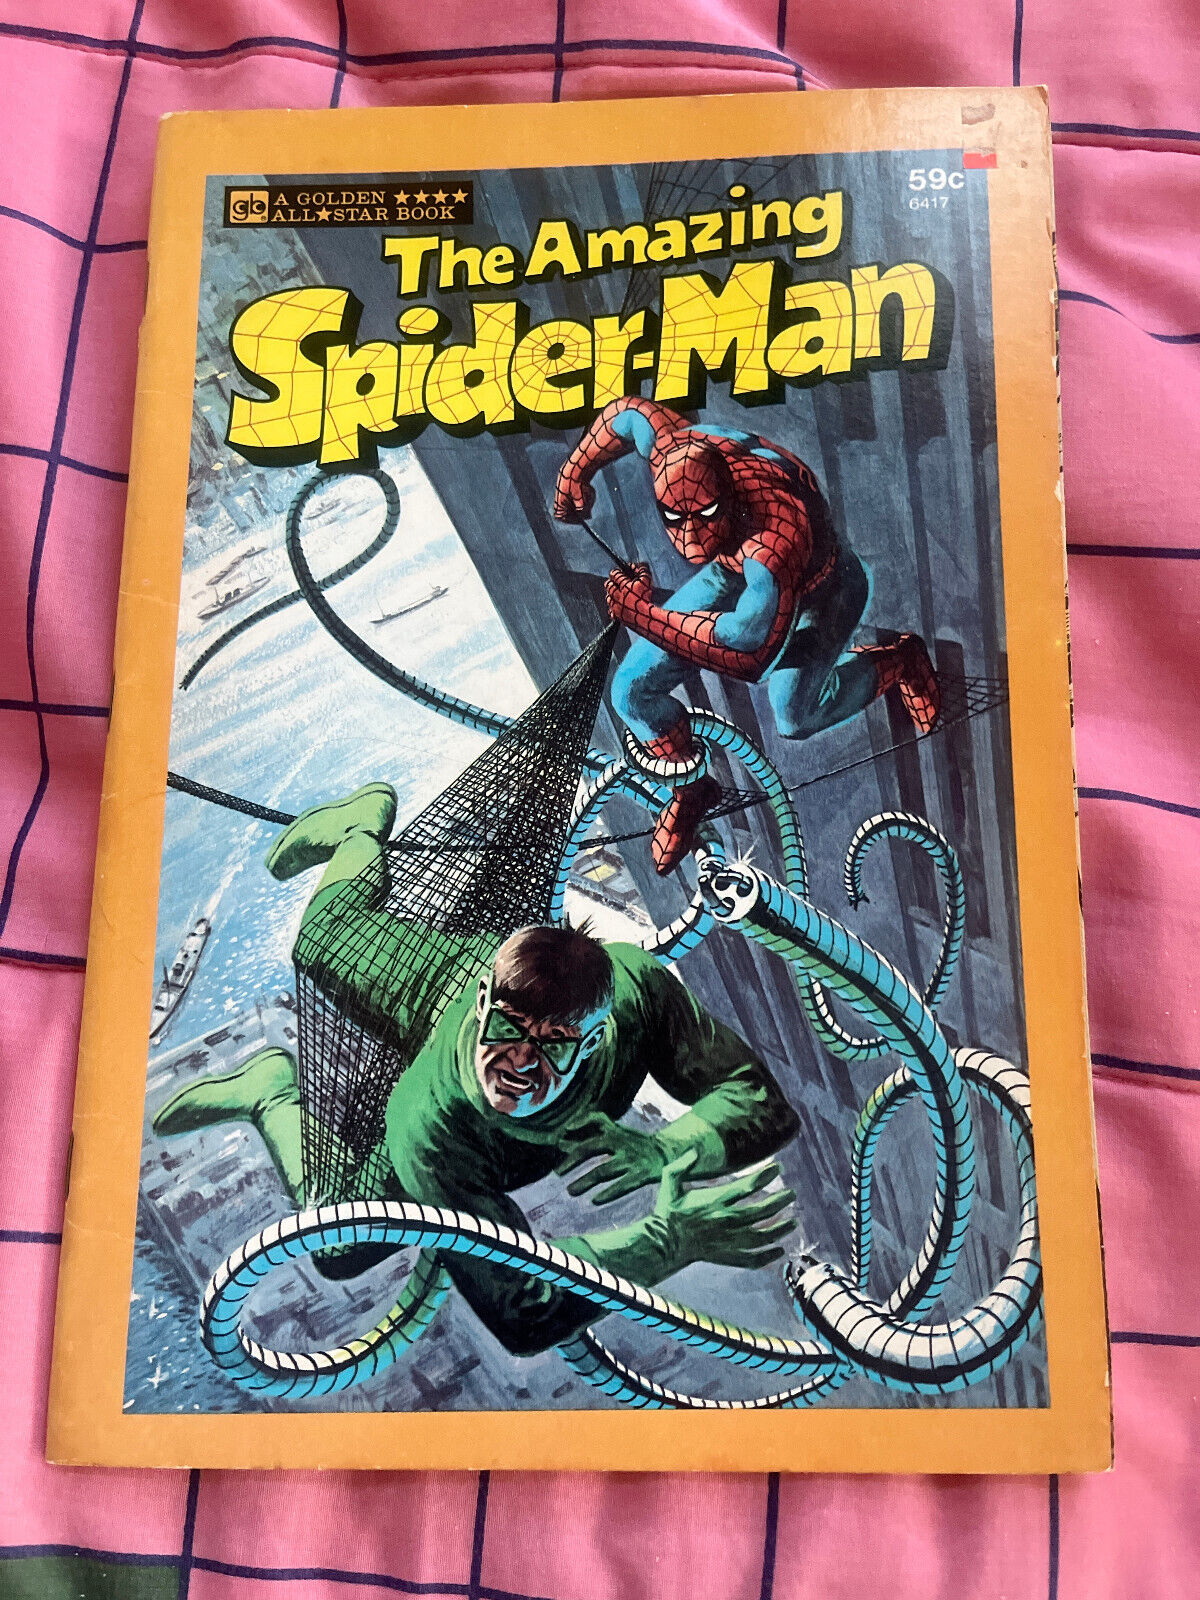 The Amazing Spiderman Golden All-Star Book